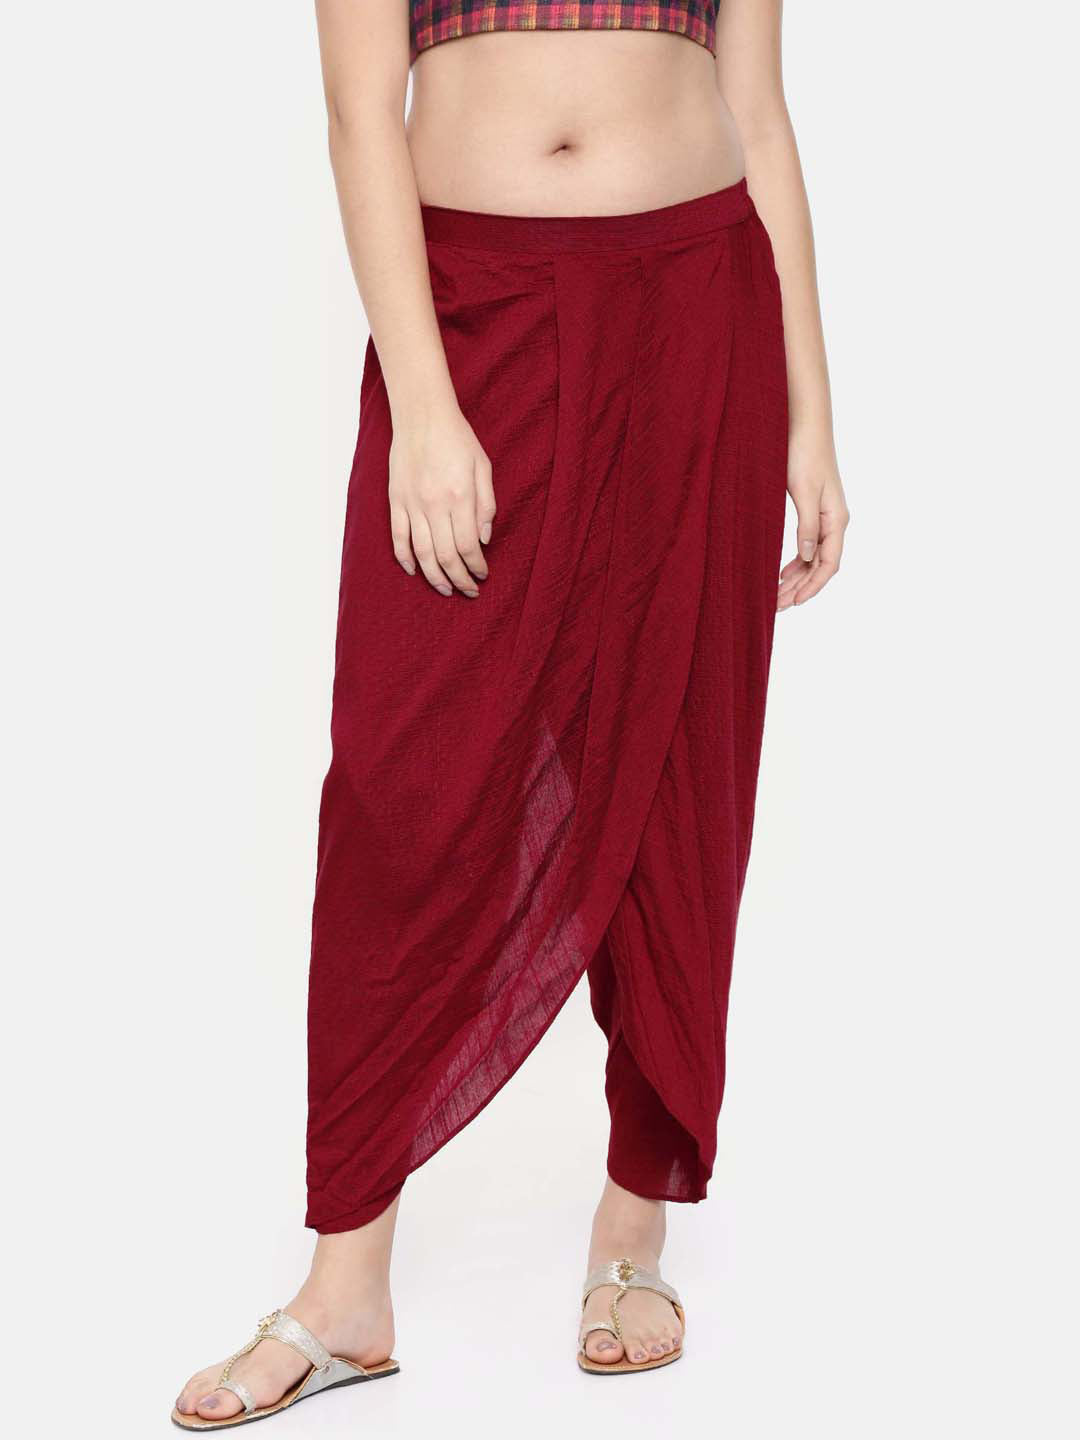 Yellow crop top with red dhoti pants - set of two by My Mini Trunk | The  Secret Label